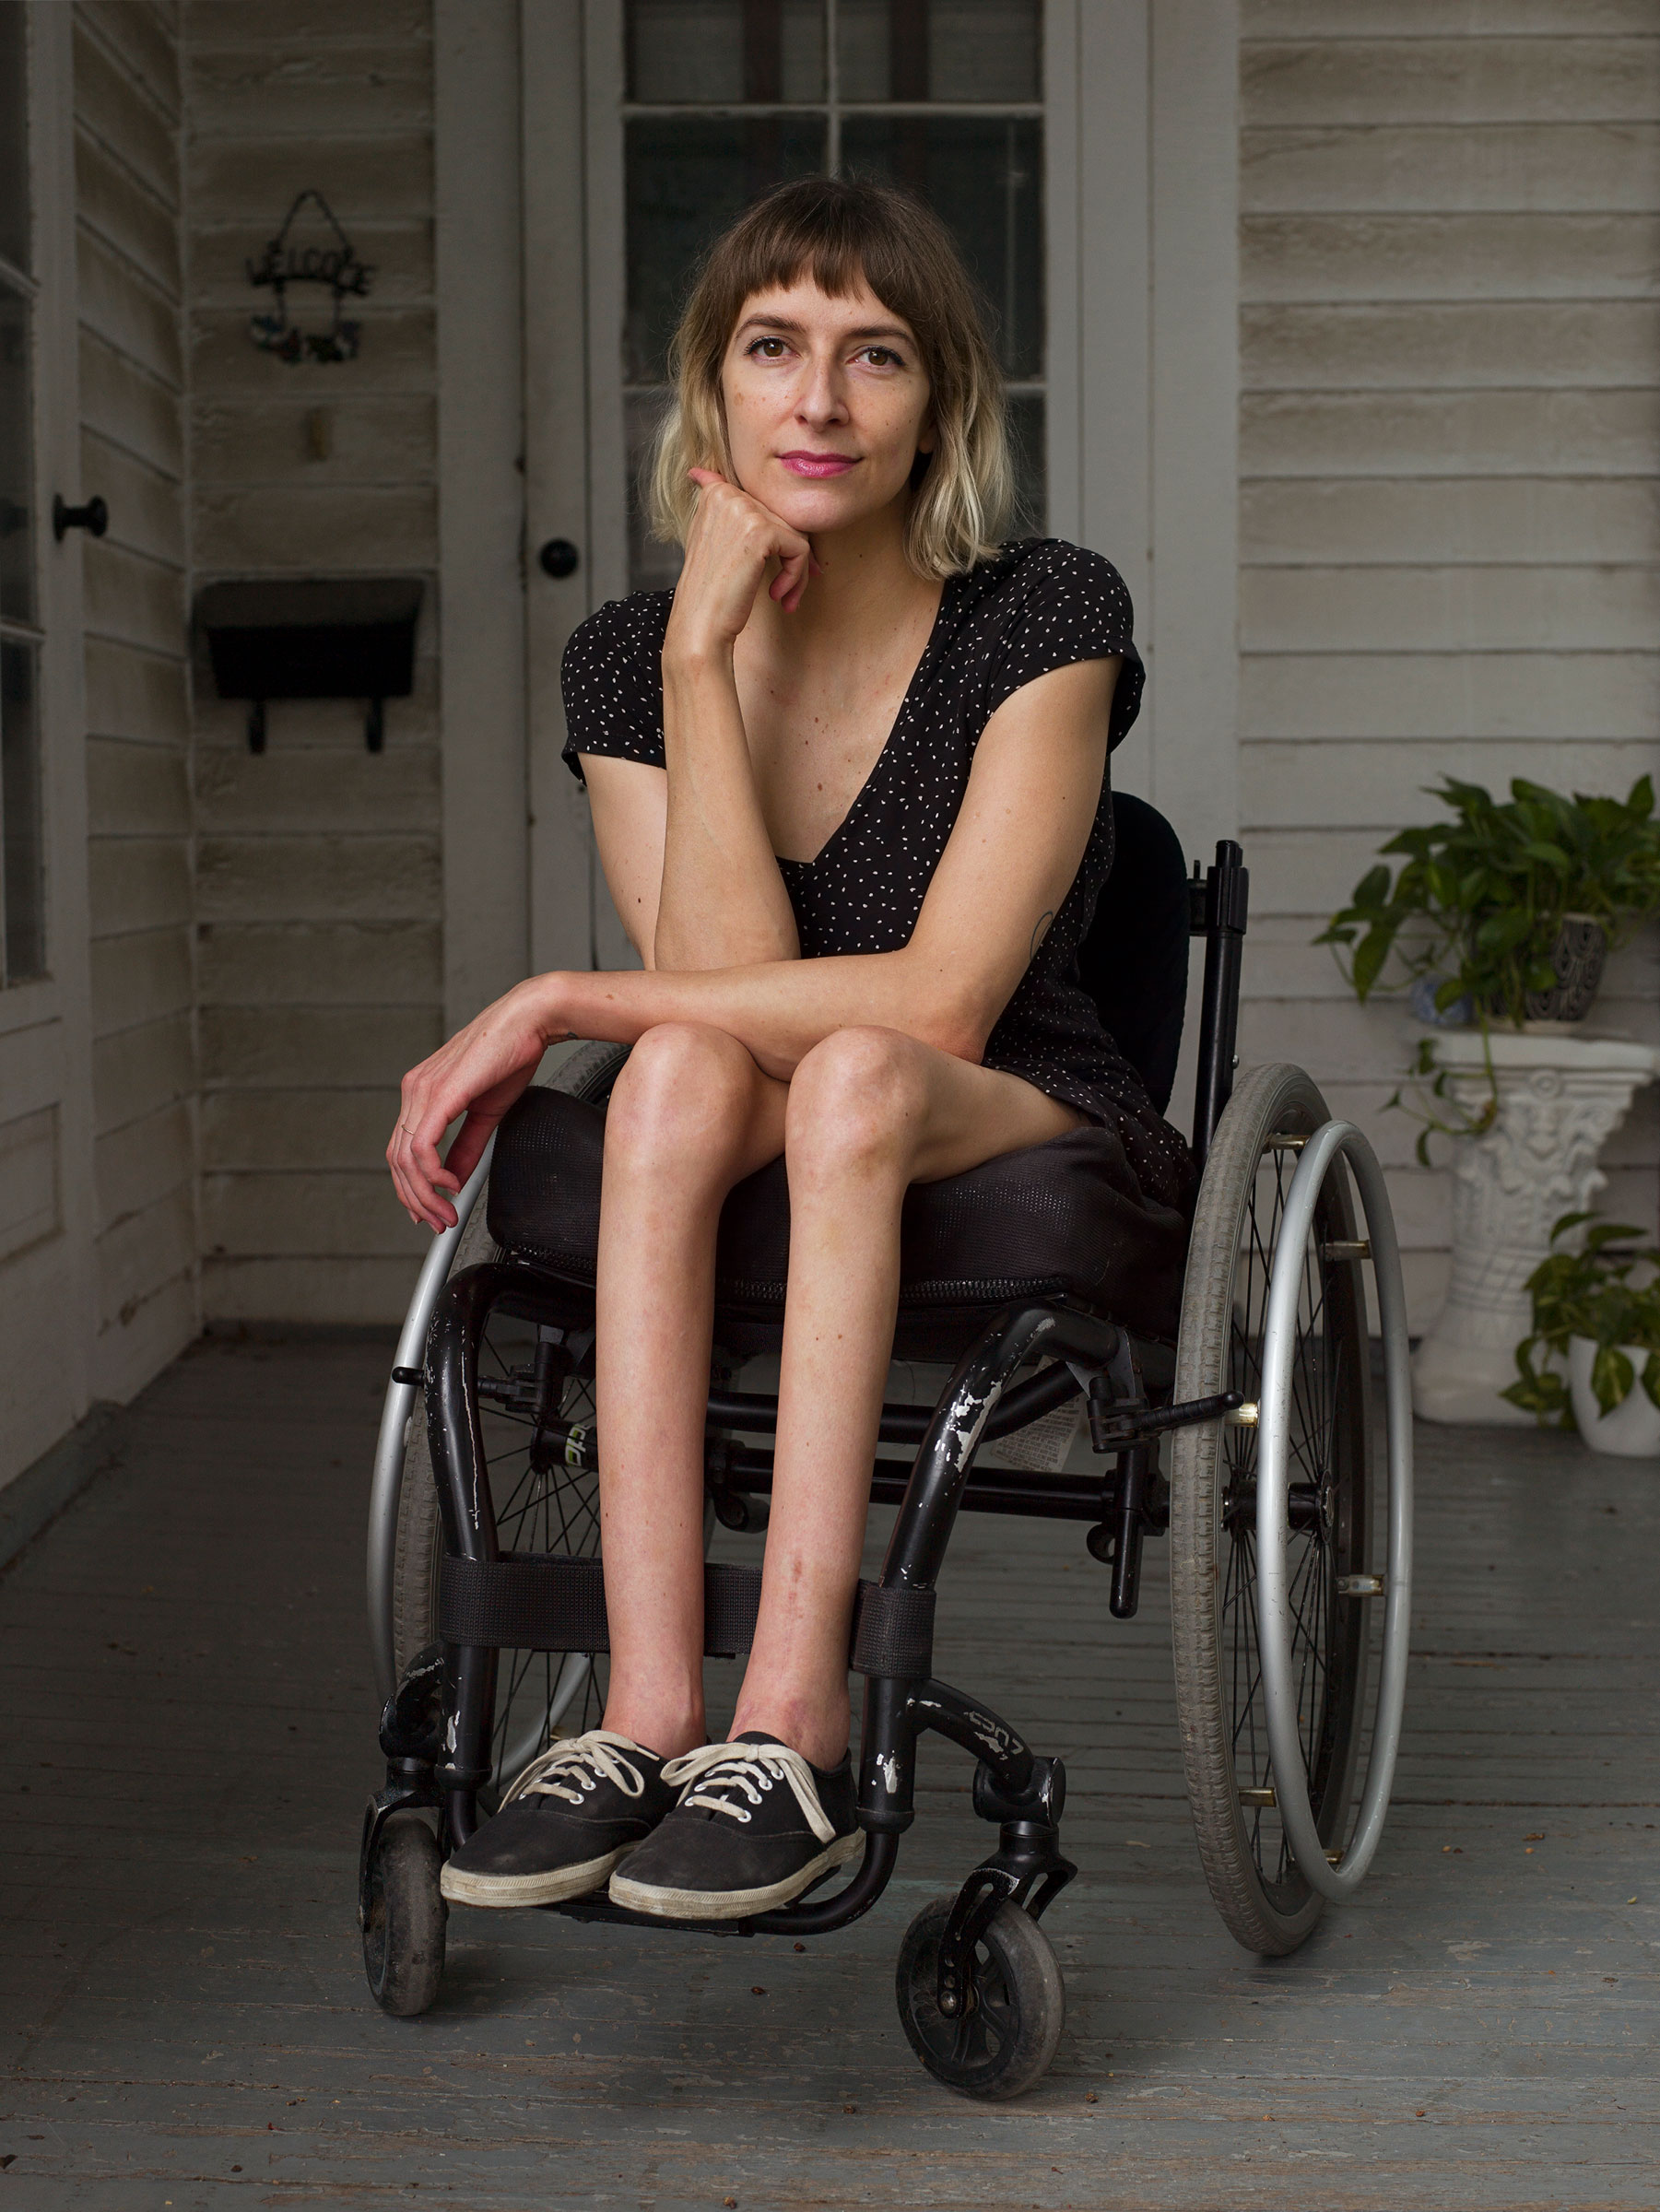 <strong>Rebekah Taussig</strong>, photographed outside her home in Kansas City, Mo., on Aug. 6. "<a href="https://time.com/5881597/disability-kindness/">What Does Kindness Look Like?</a>" Aug. 31 issue. (Jess Dugan for TIME)